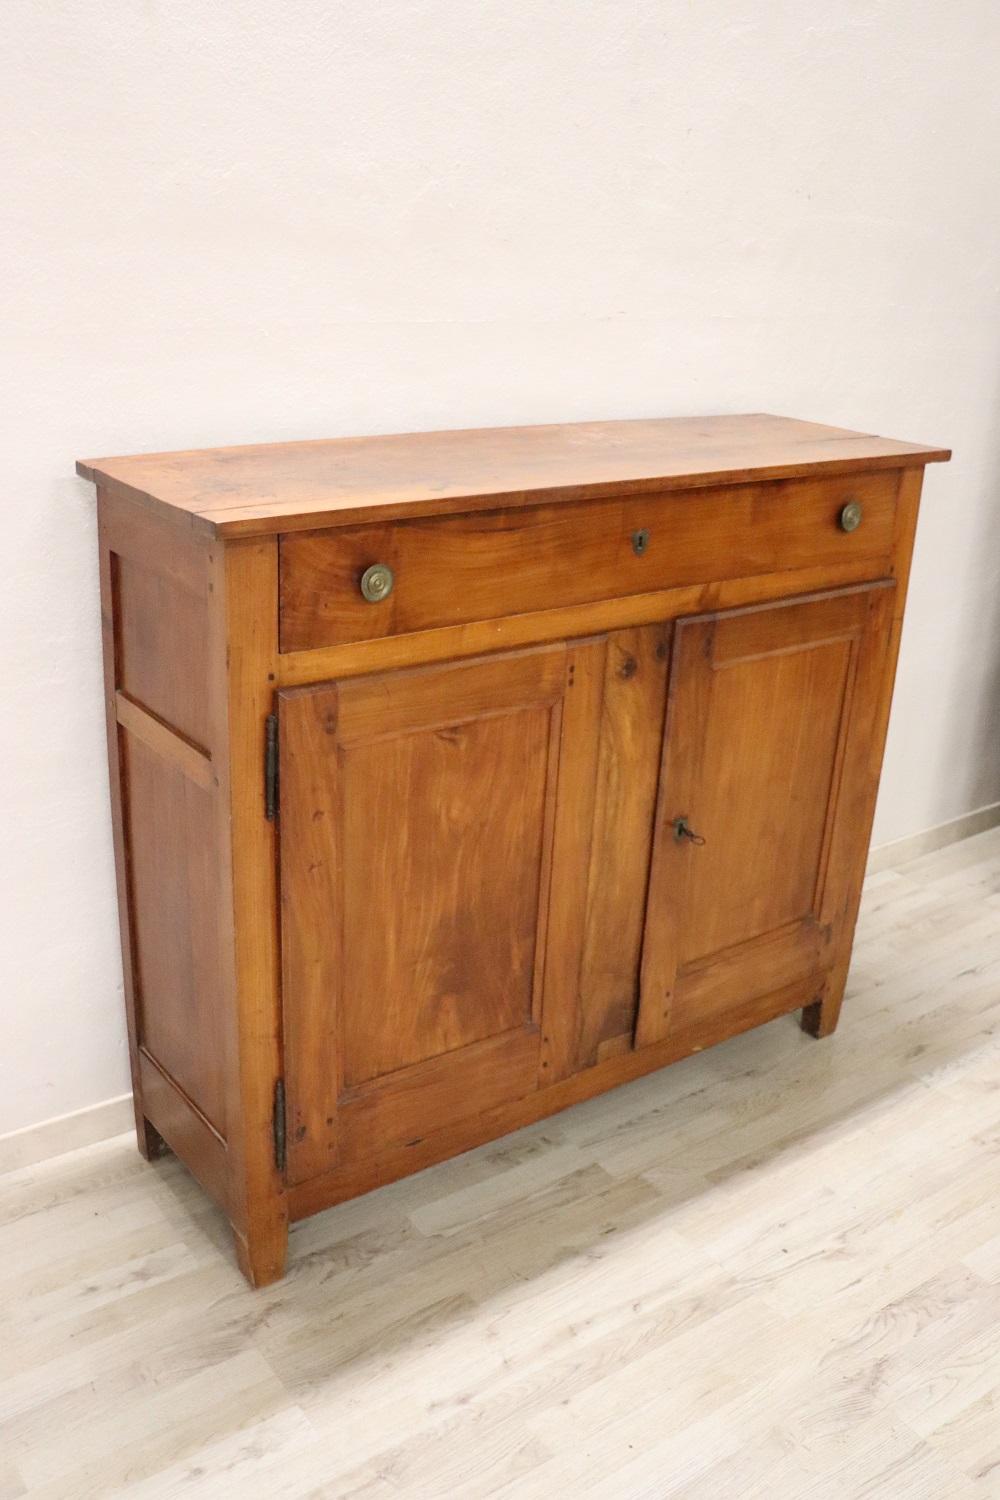 Beautiful antique sideboard in solid cherry wood made in 1810s. The line is simple and essential in Louis XVI Style, perfect to be placed also in a modern environment. Beautiful patina of cherry wood. Ample useful internal space equipped with one